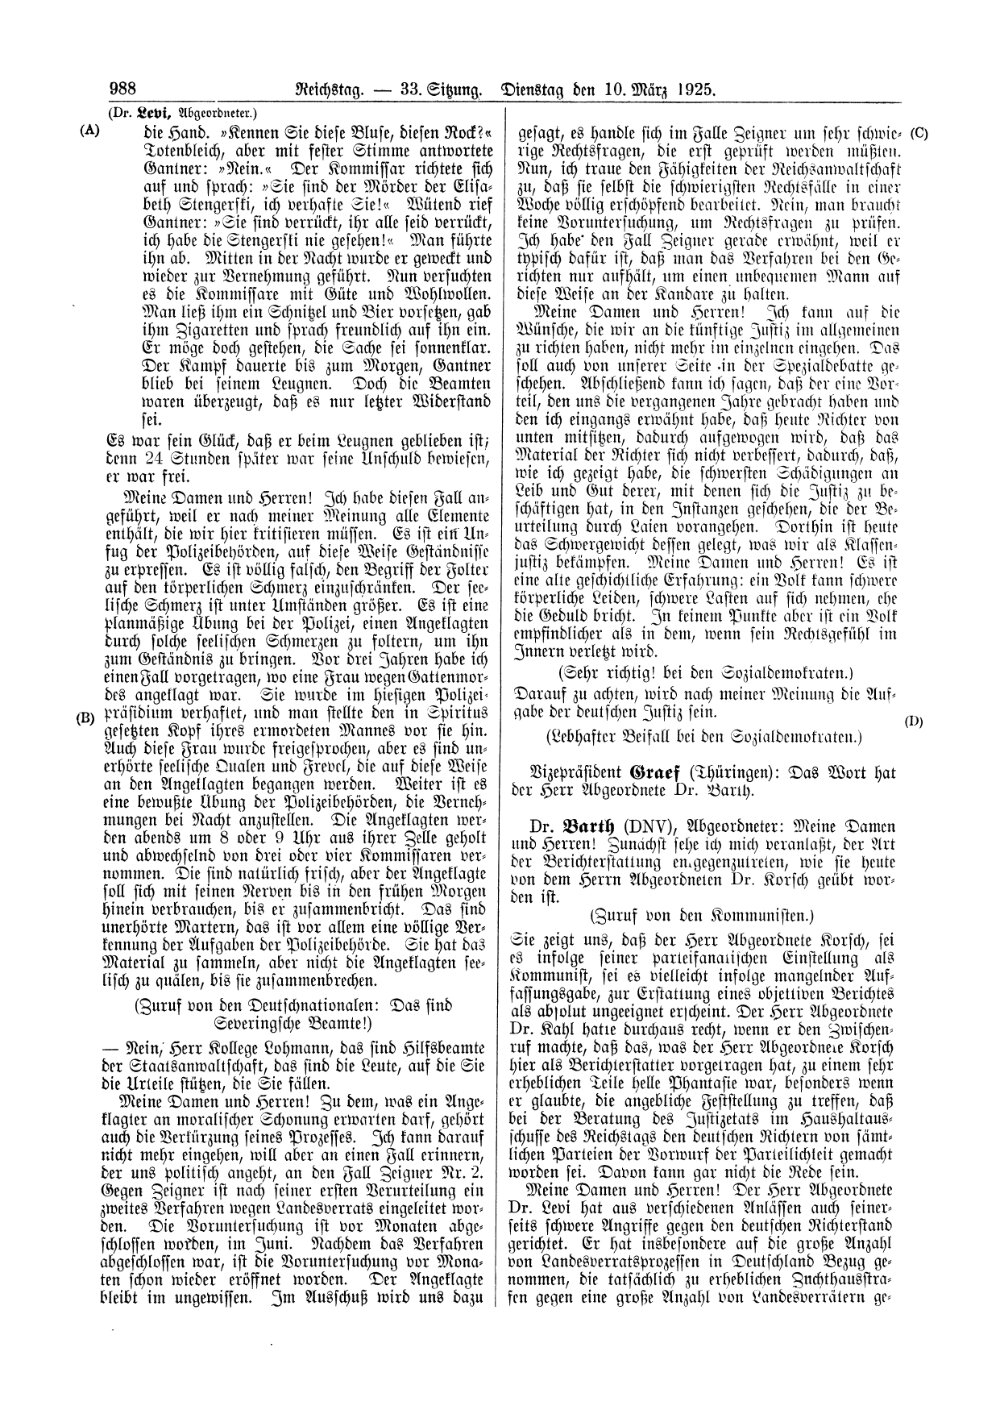 Scan of page 988